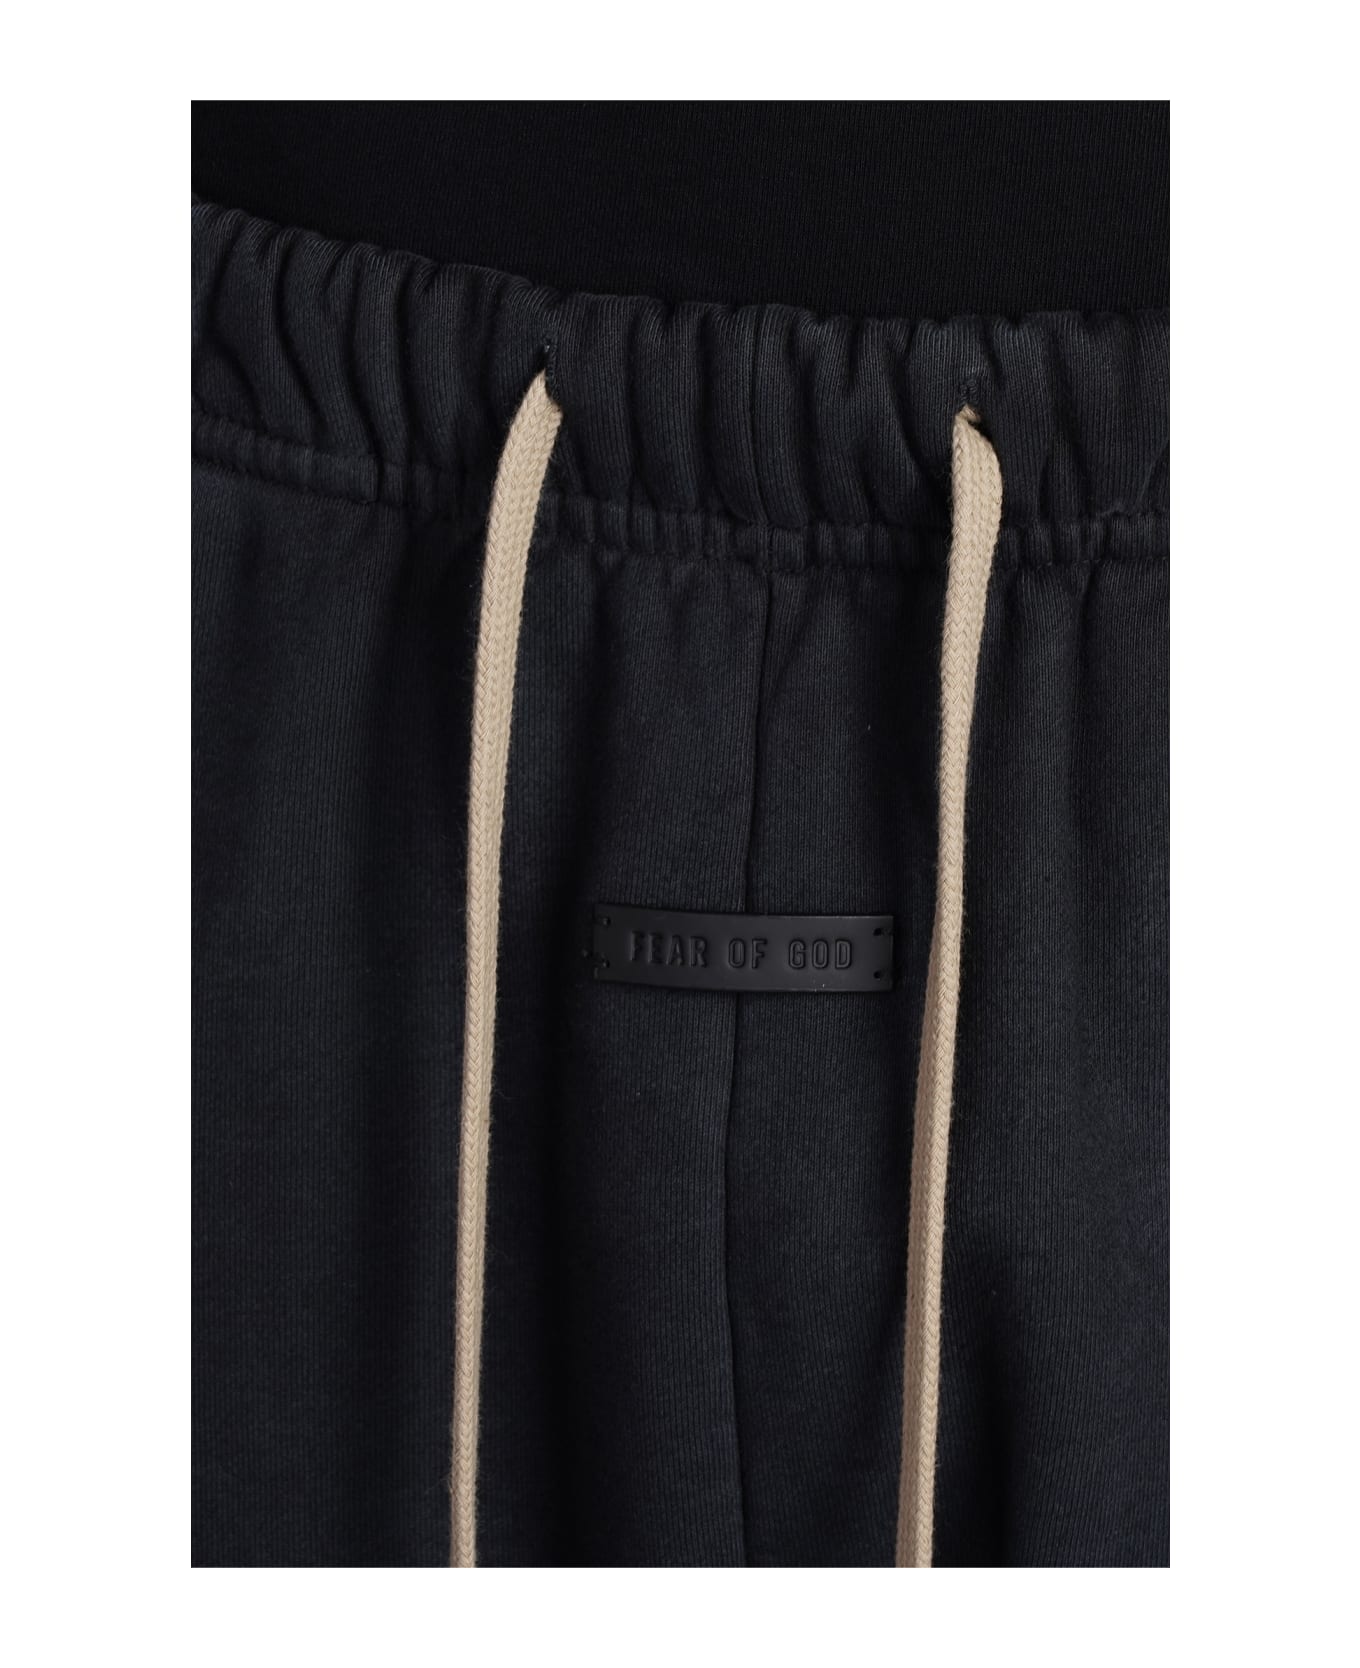 Fear of God Pants In Black Cotton - black ボトムス